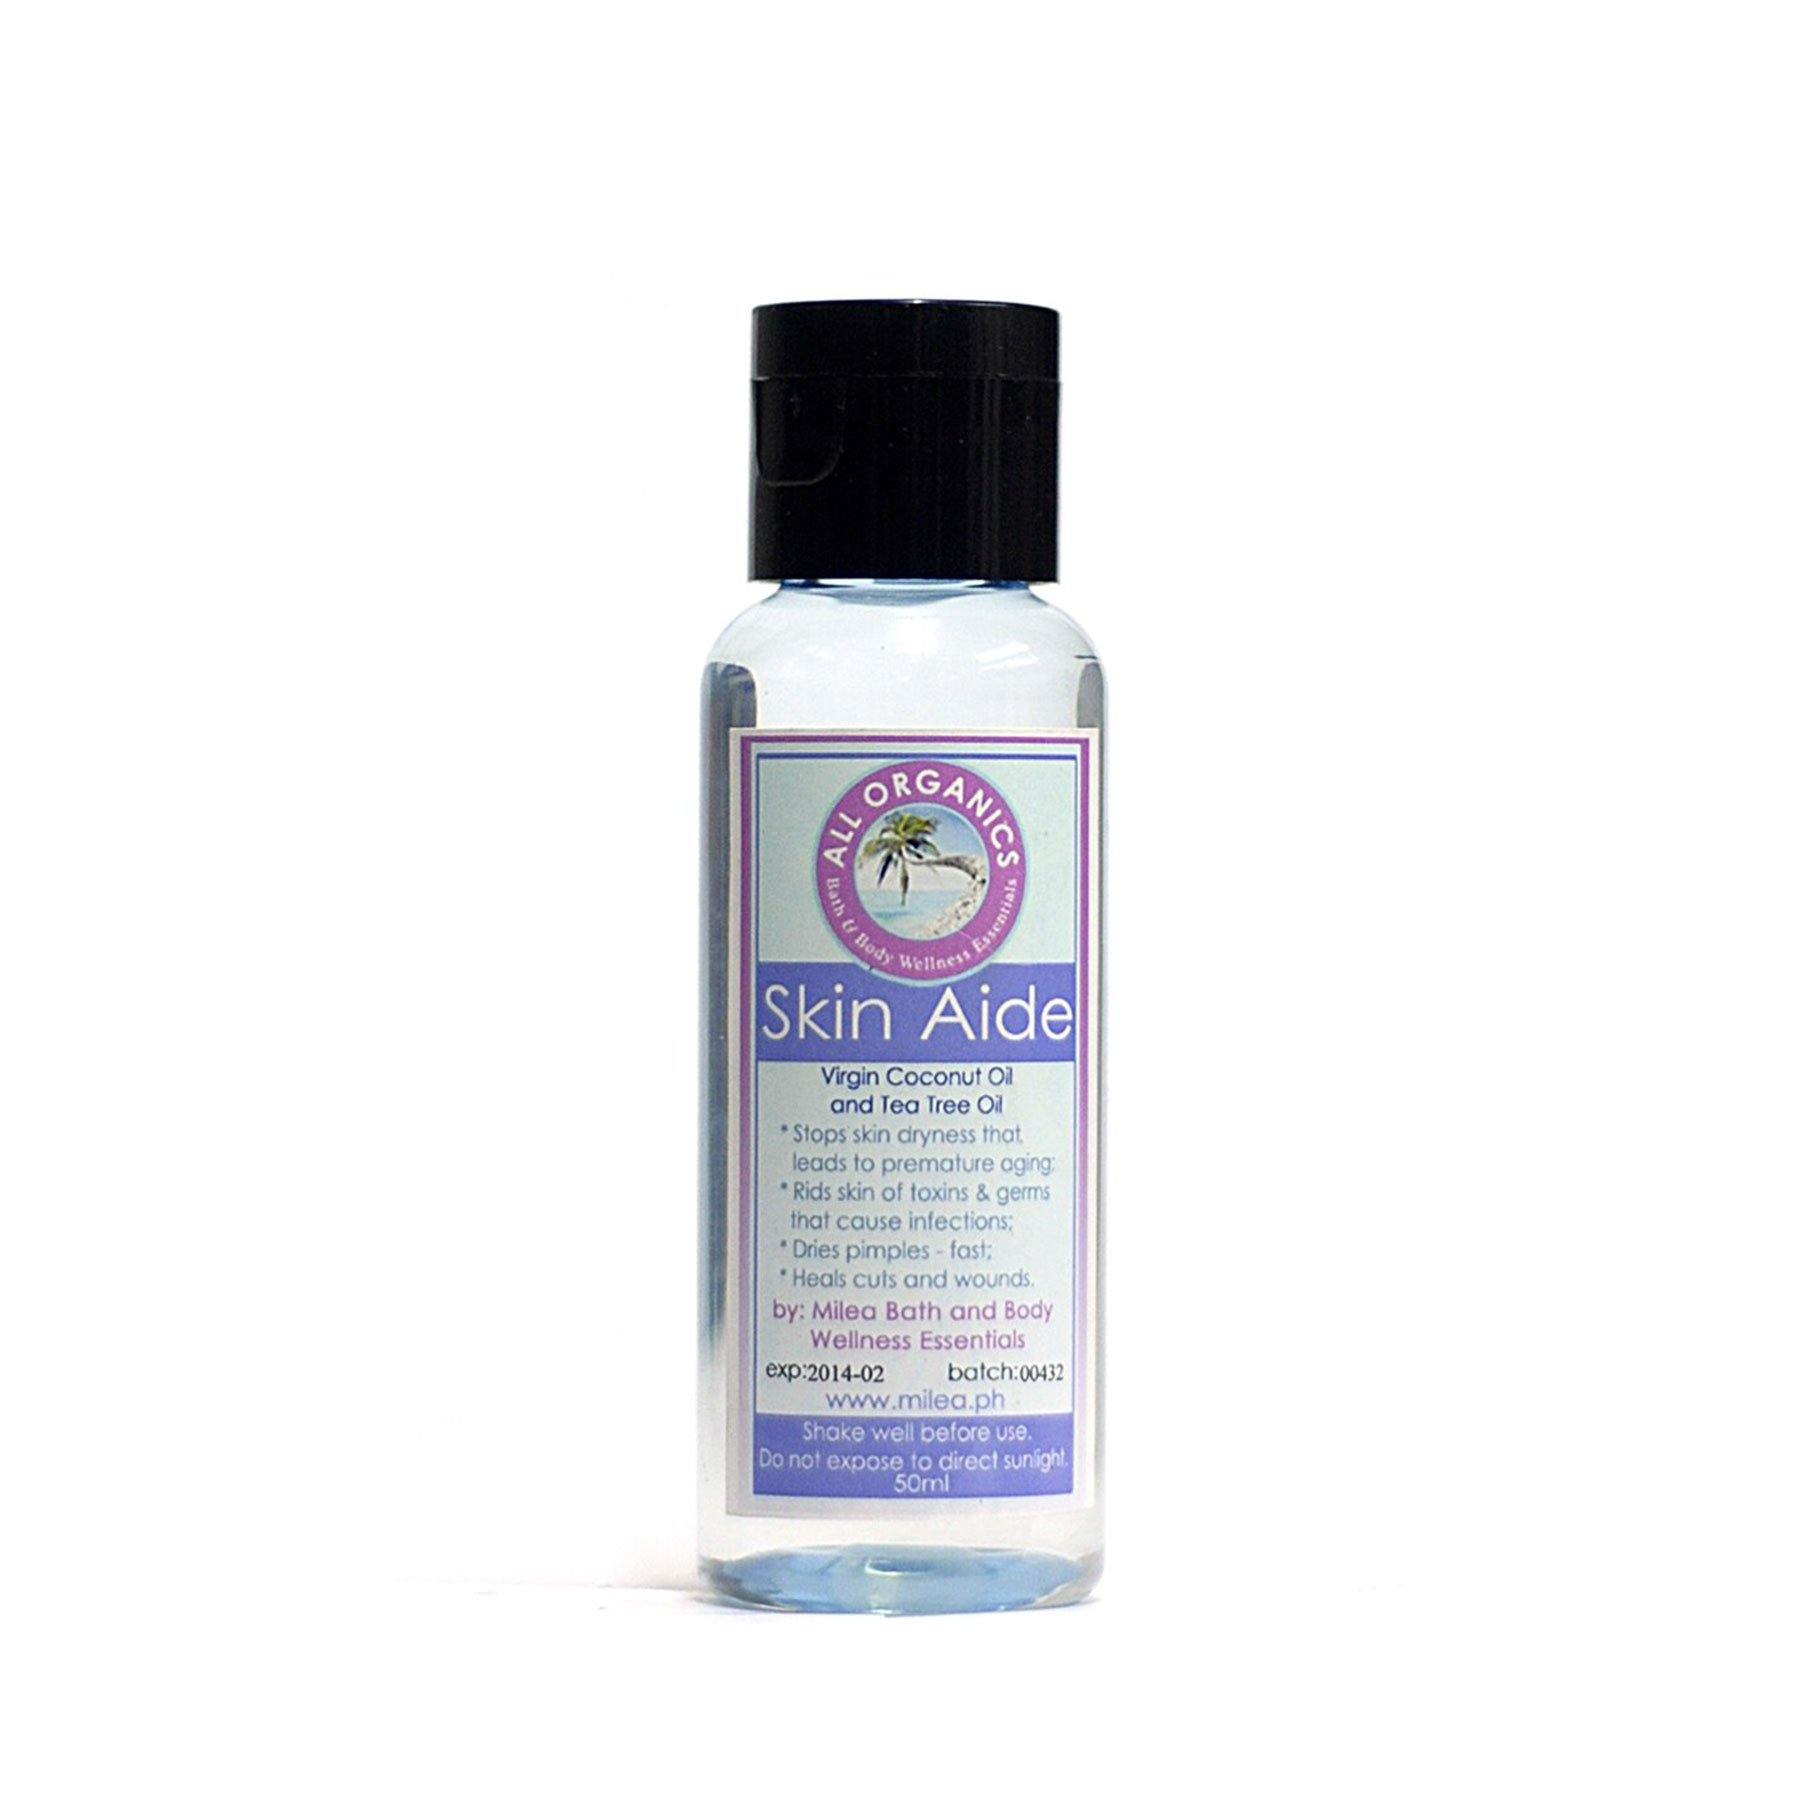 Skin Aide - Intensive Care for Troubled Skin - Milea All Organics - Philippines